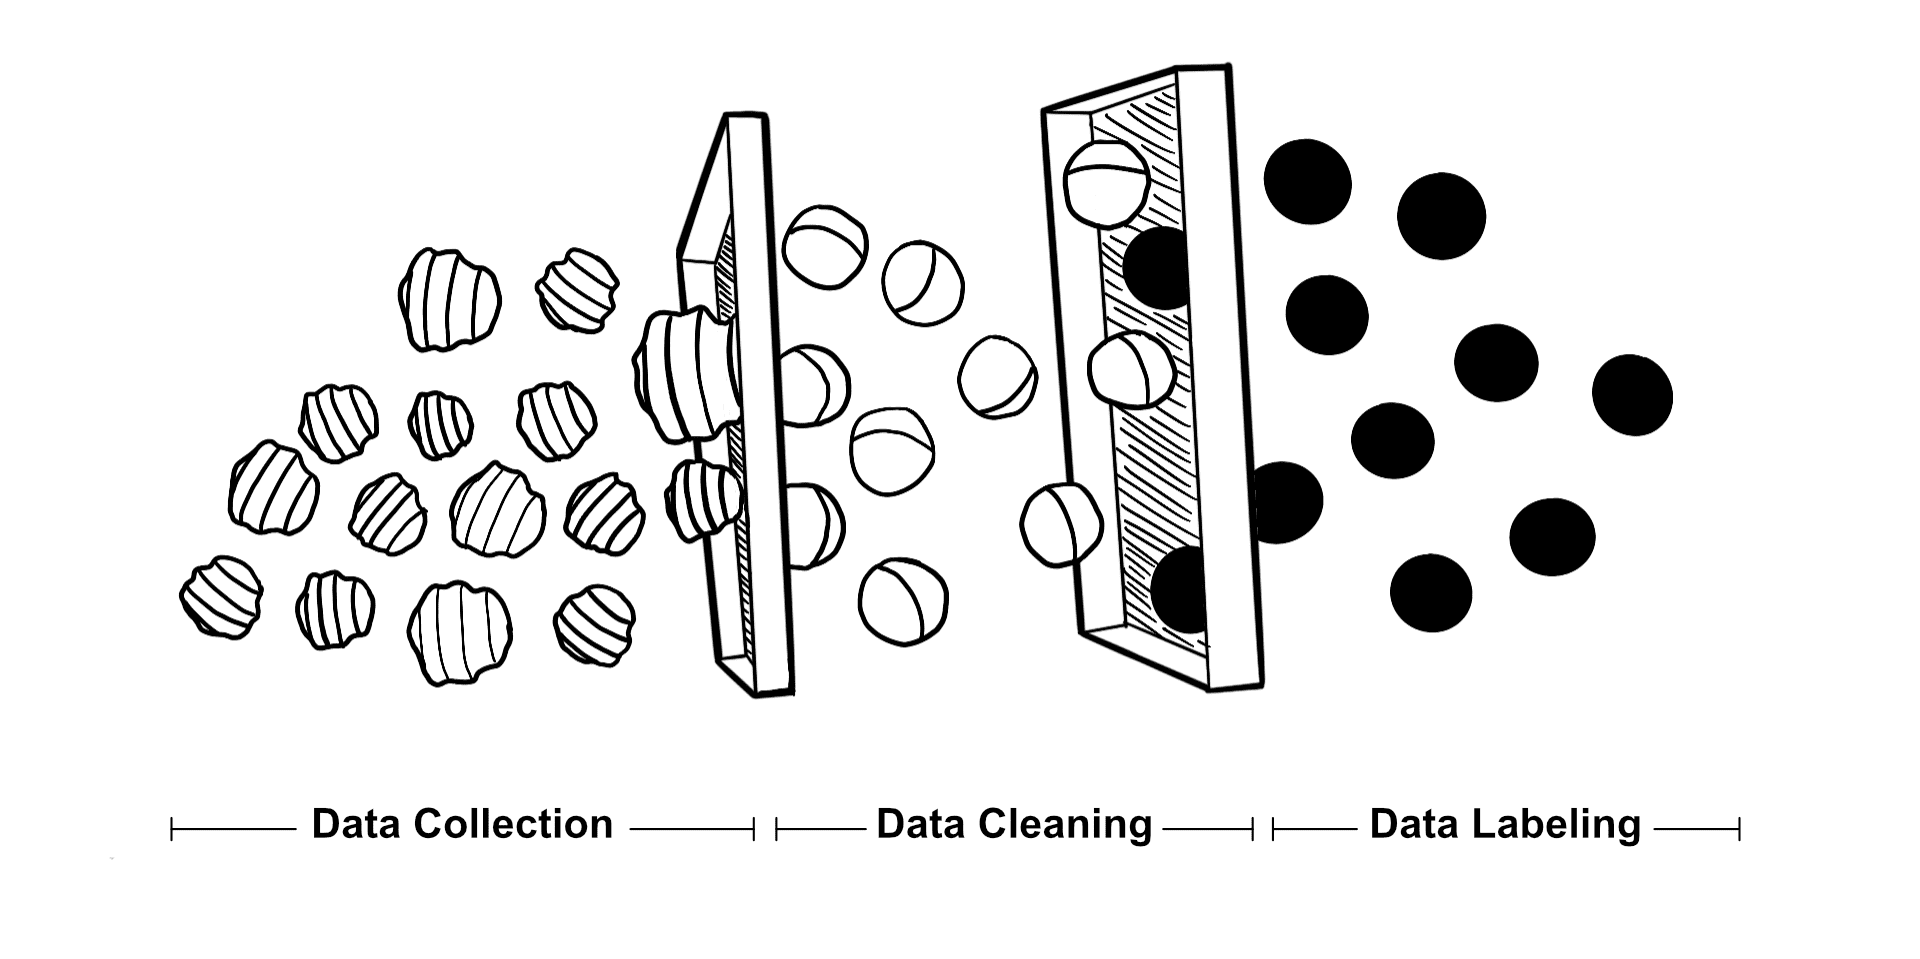 Sketch showing the data alienation process